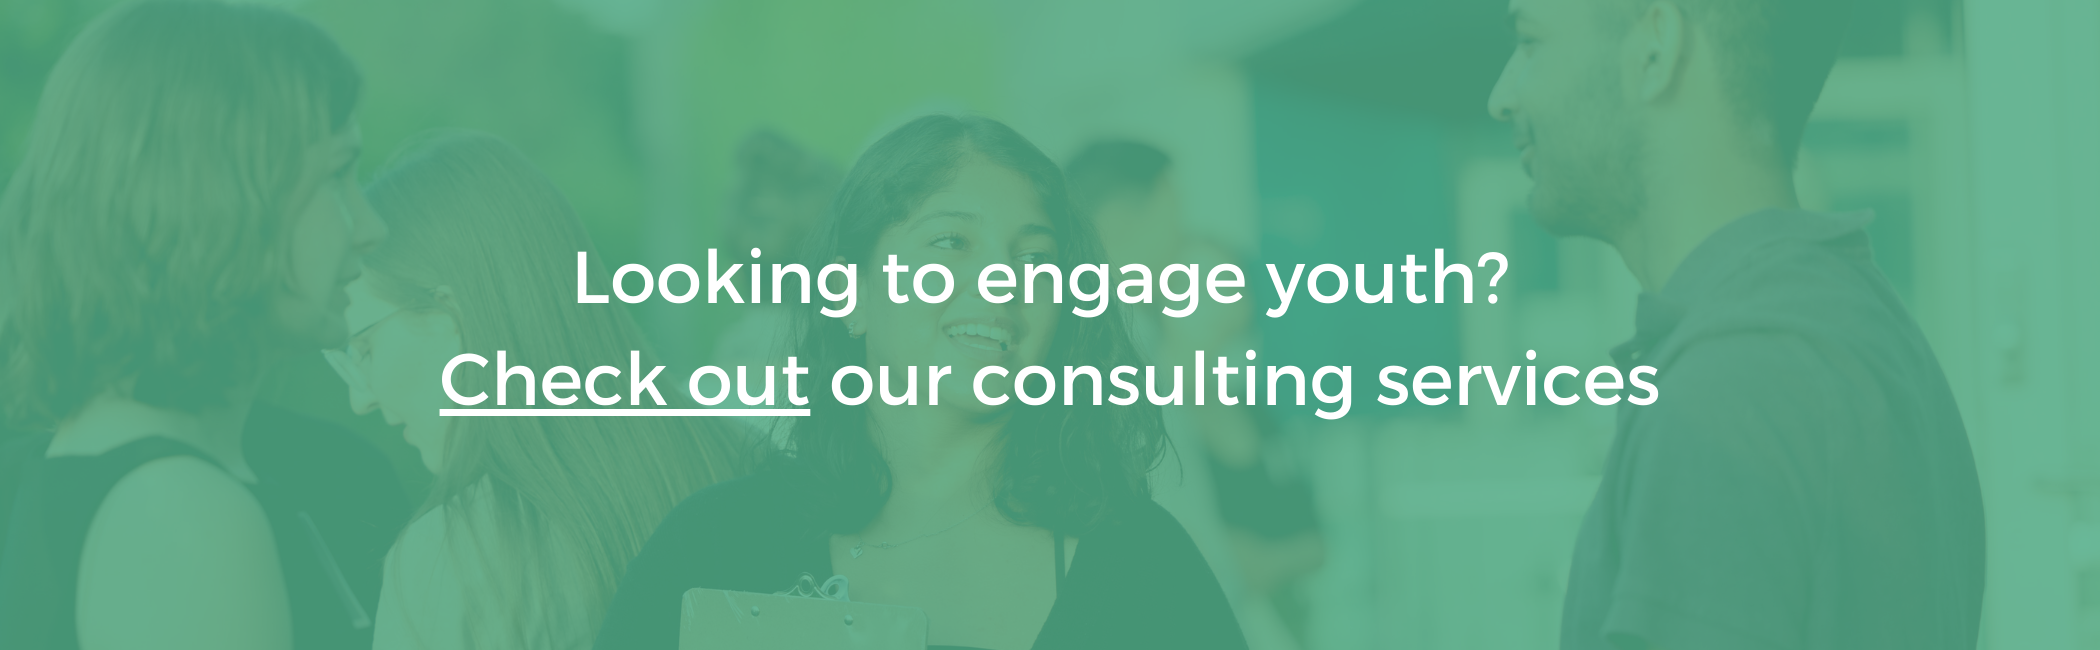 White text on teal background that reads "Looking to engage youth? Check out our consulting services". In the background there are three young people in conversation.